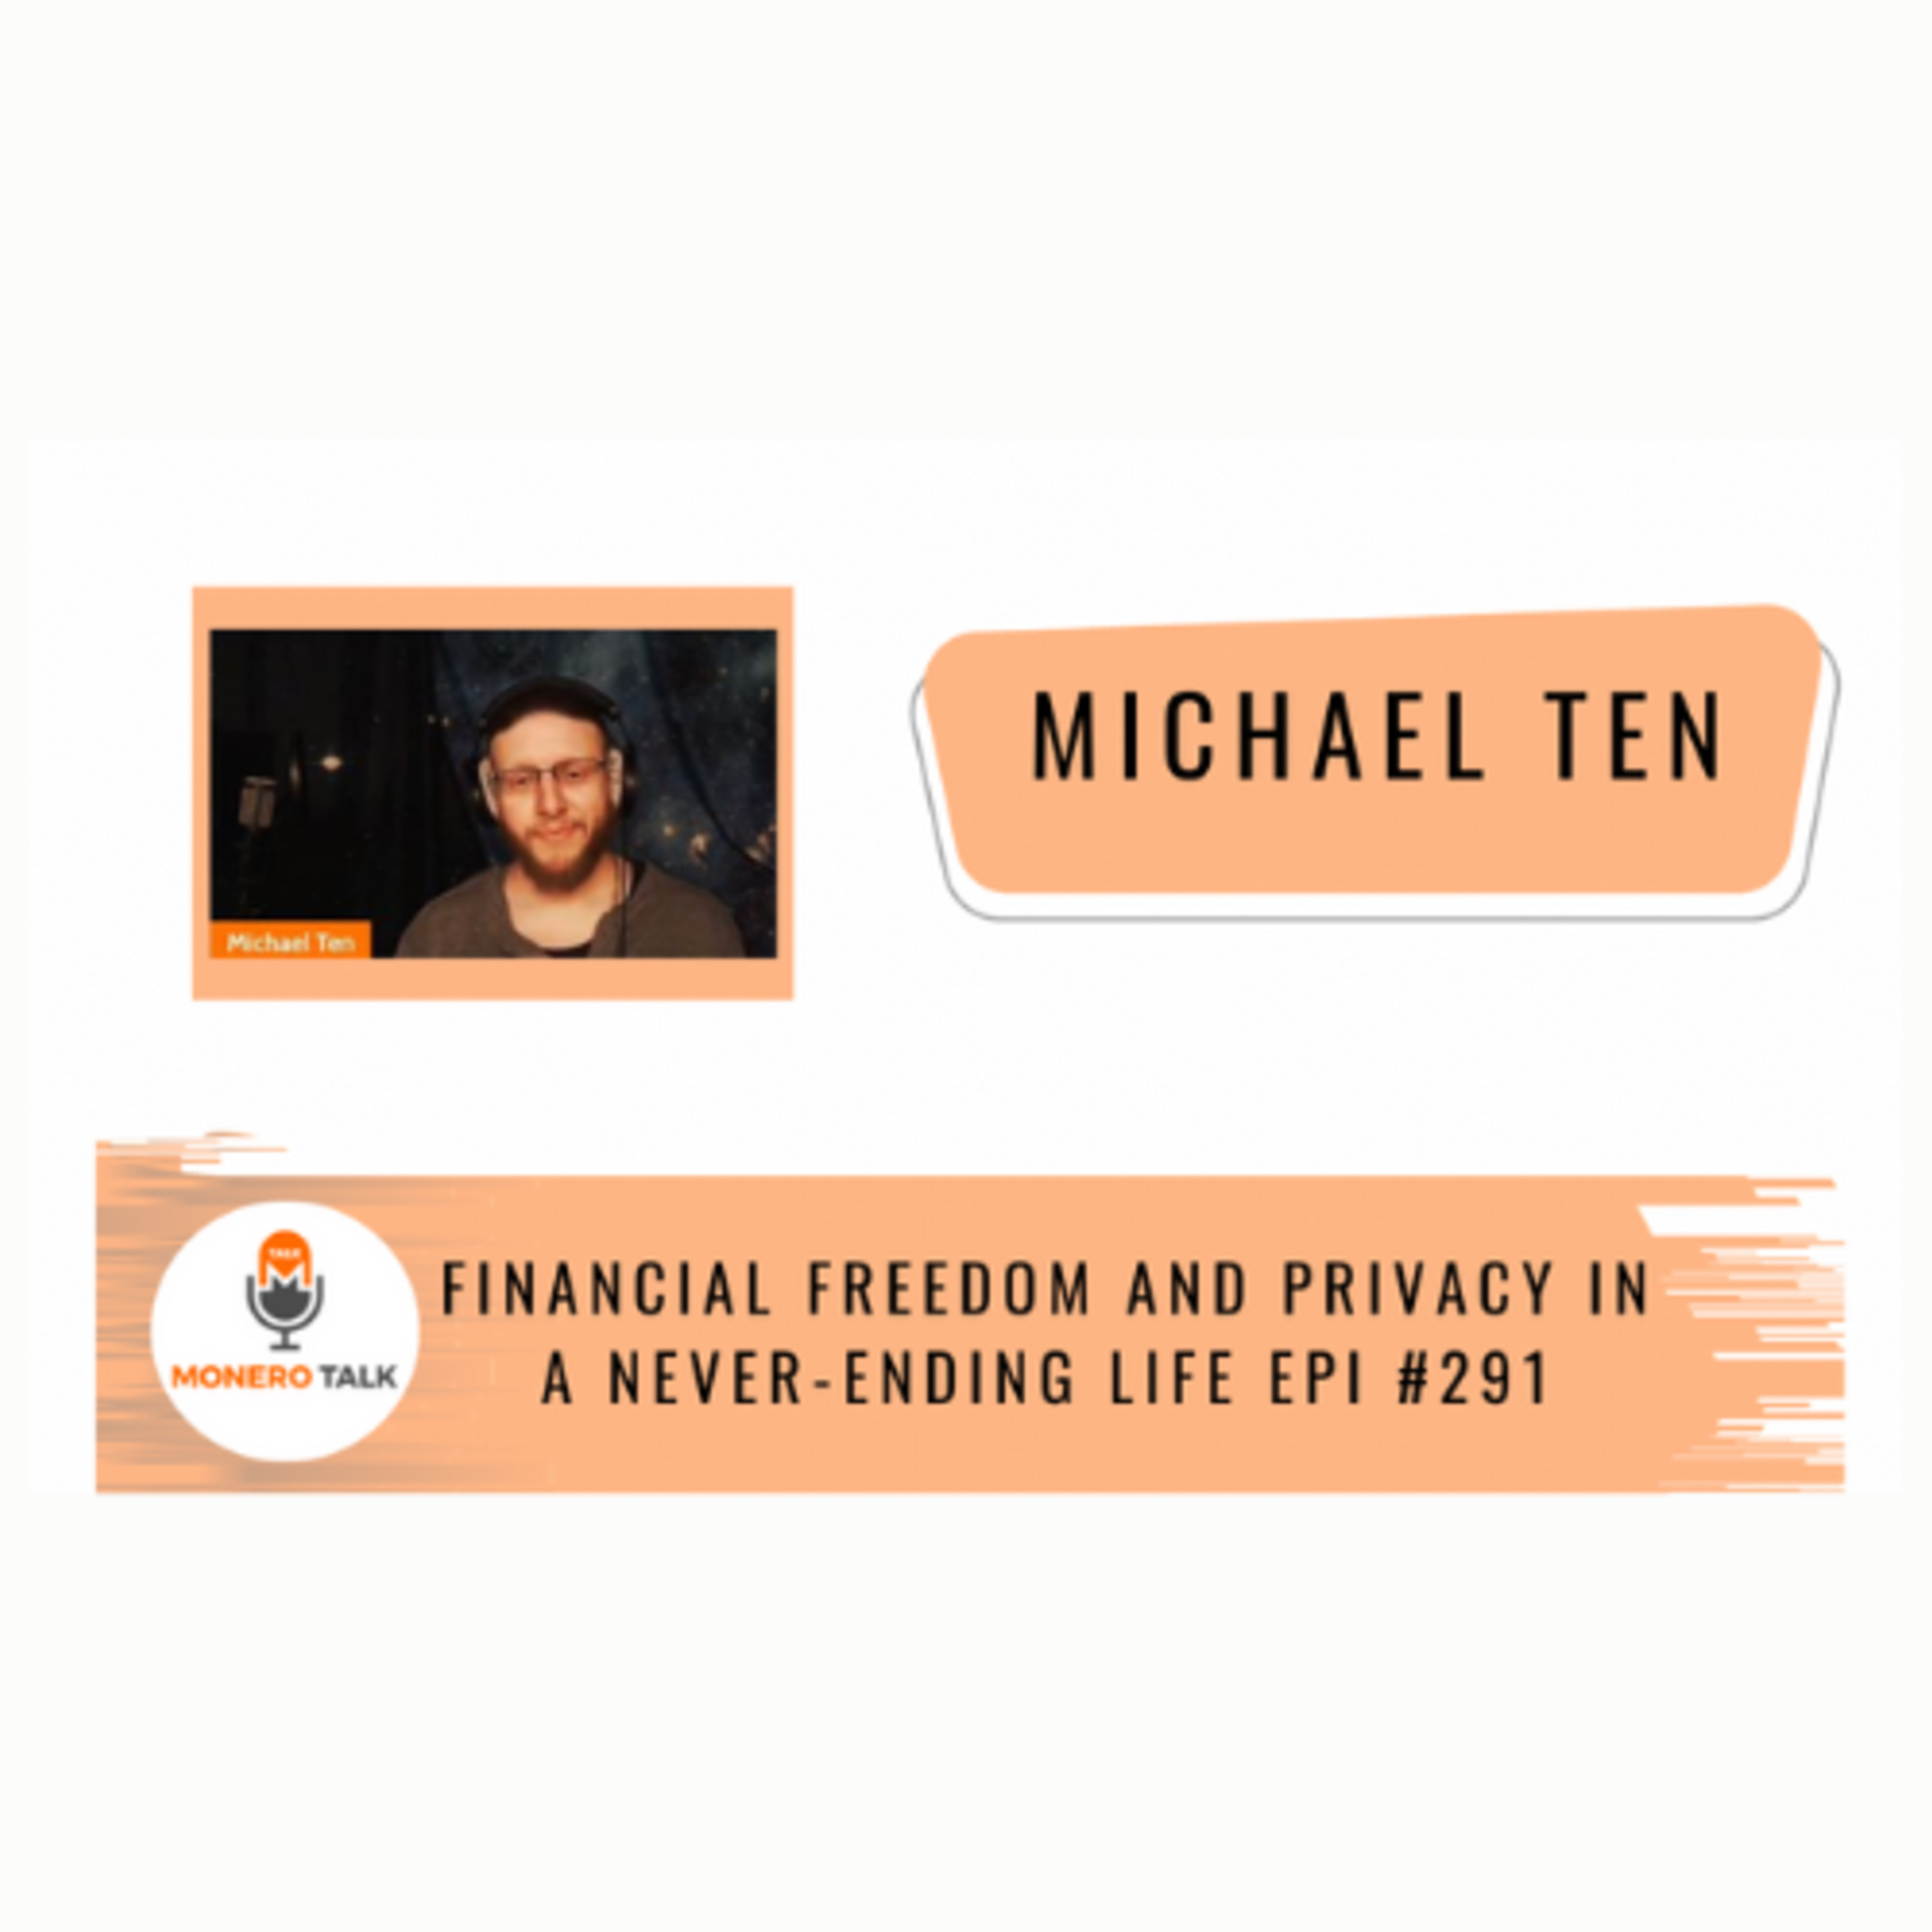 Financial freedom and privacy in a never-ending life w/ Michael Ten | EPI #291